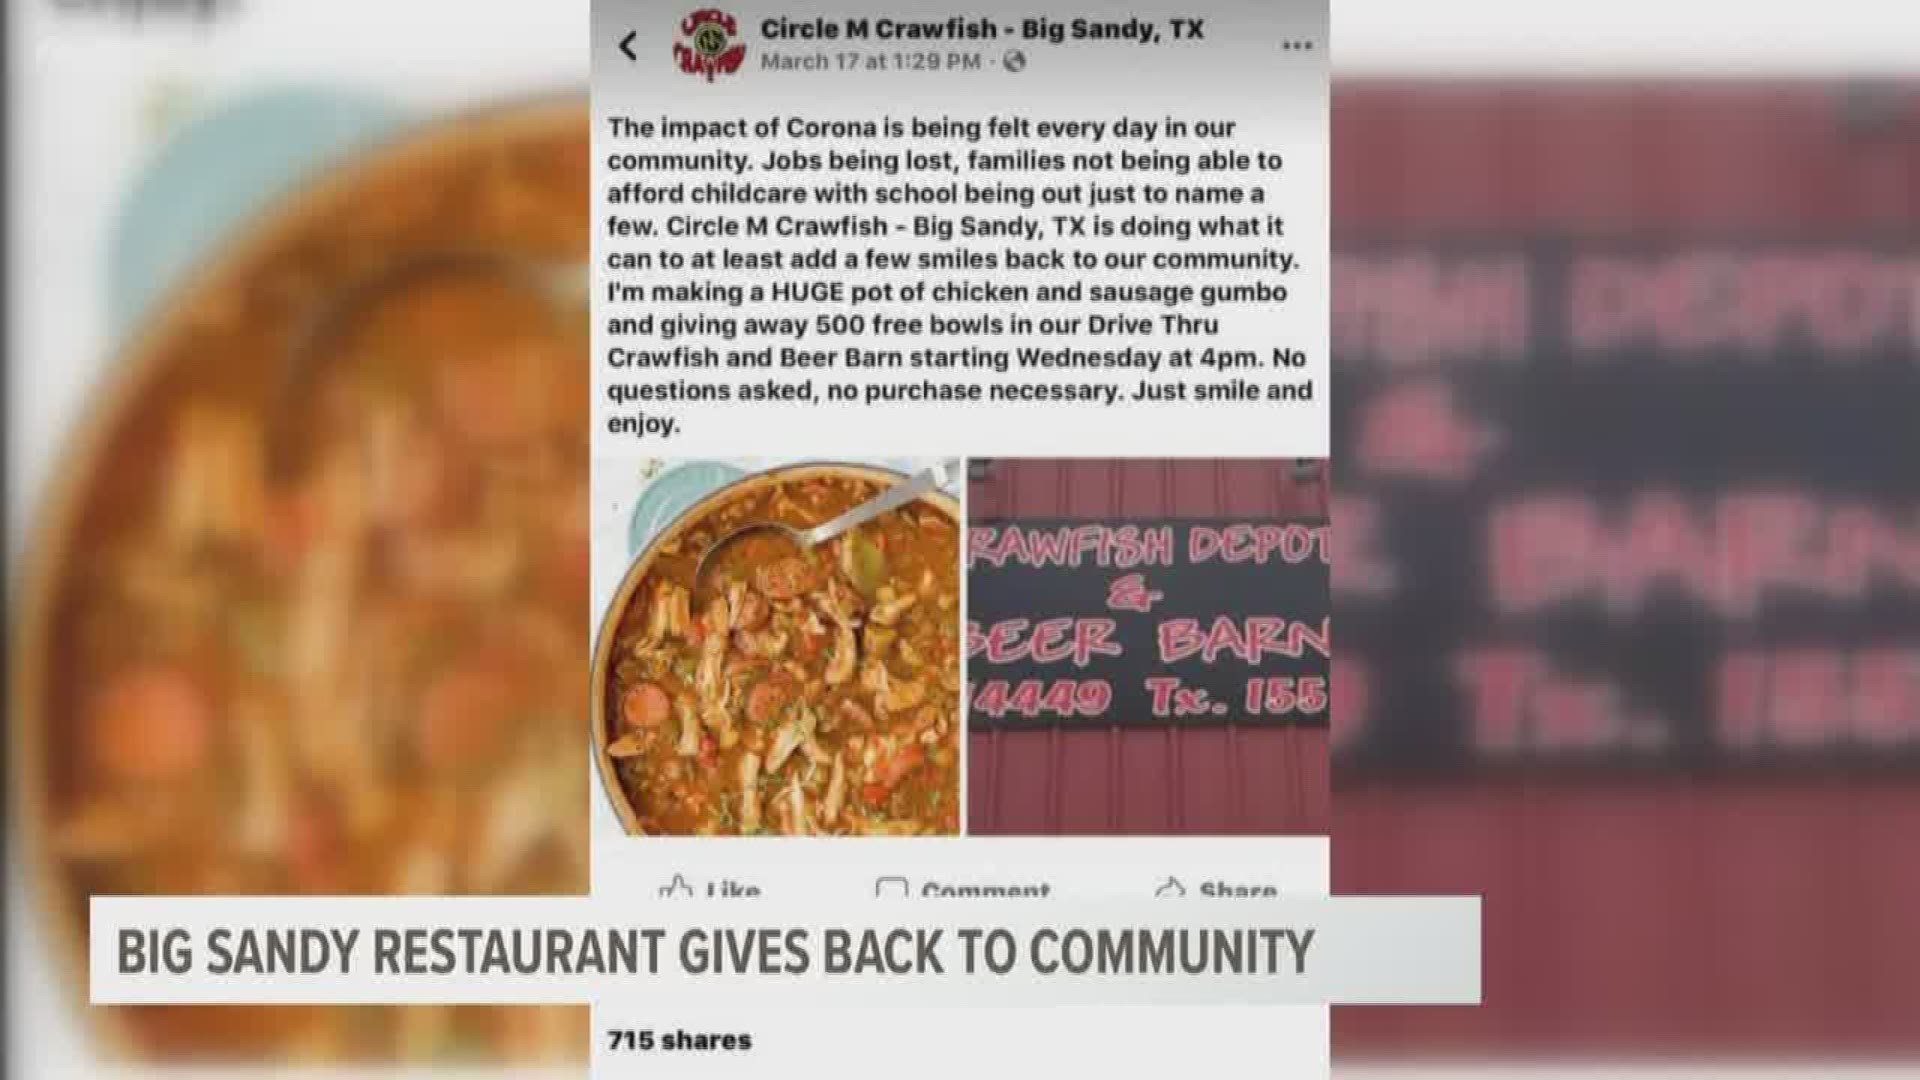 Big Sandy restaurant thanks customers by giving back with free gumbo.